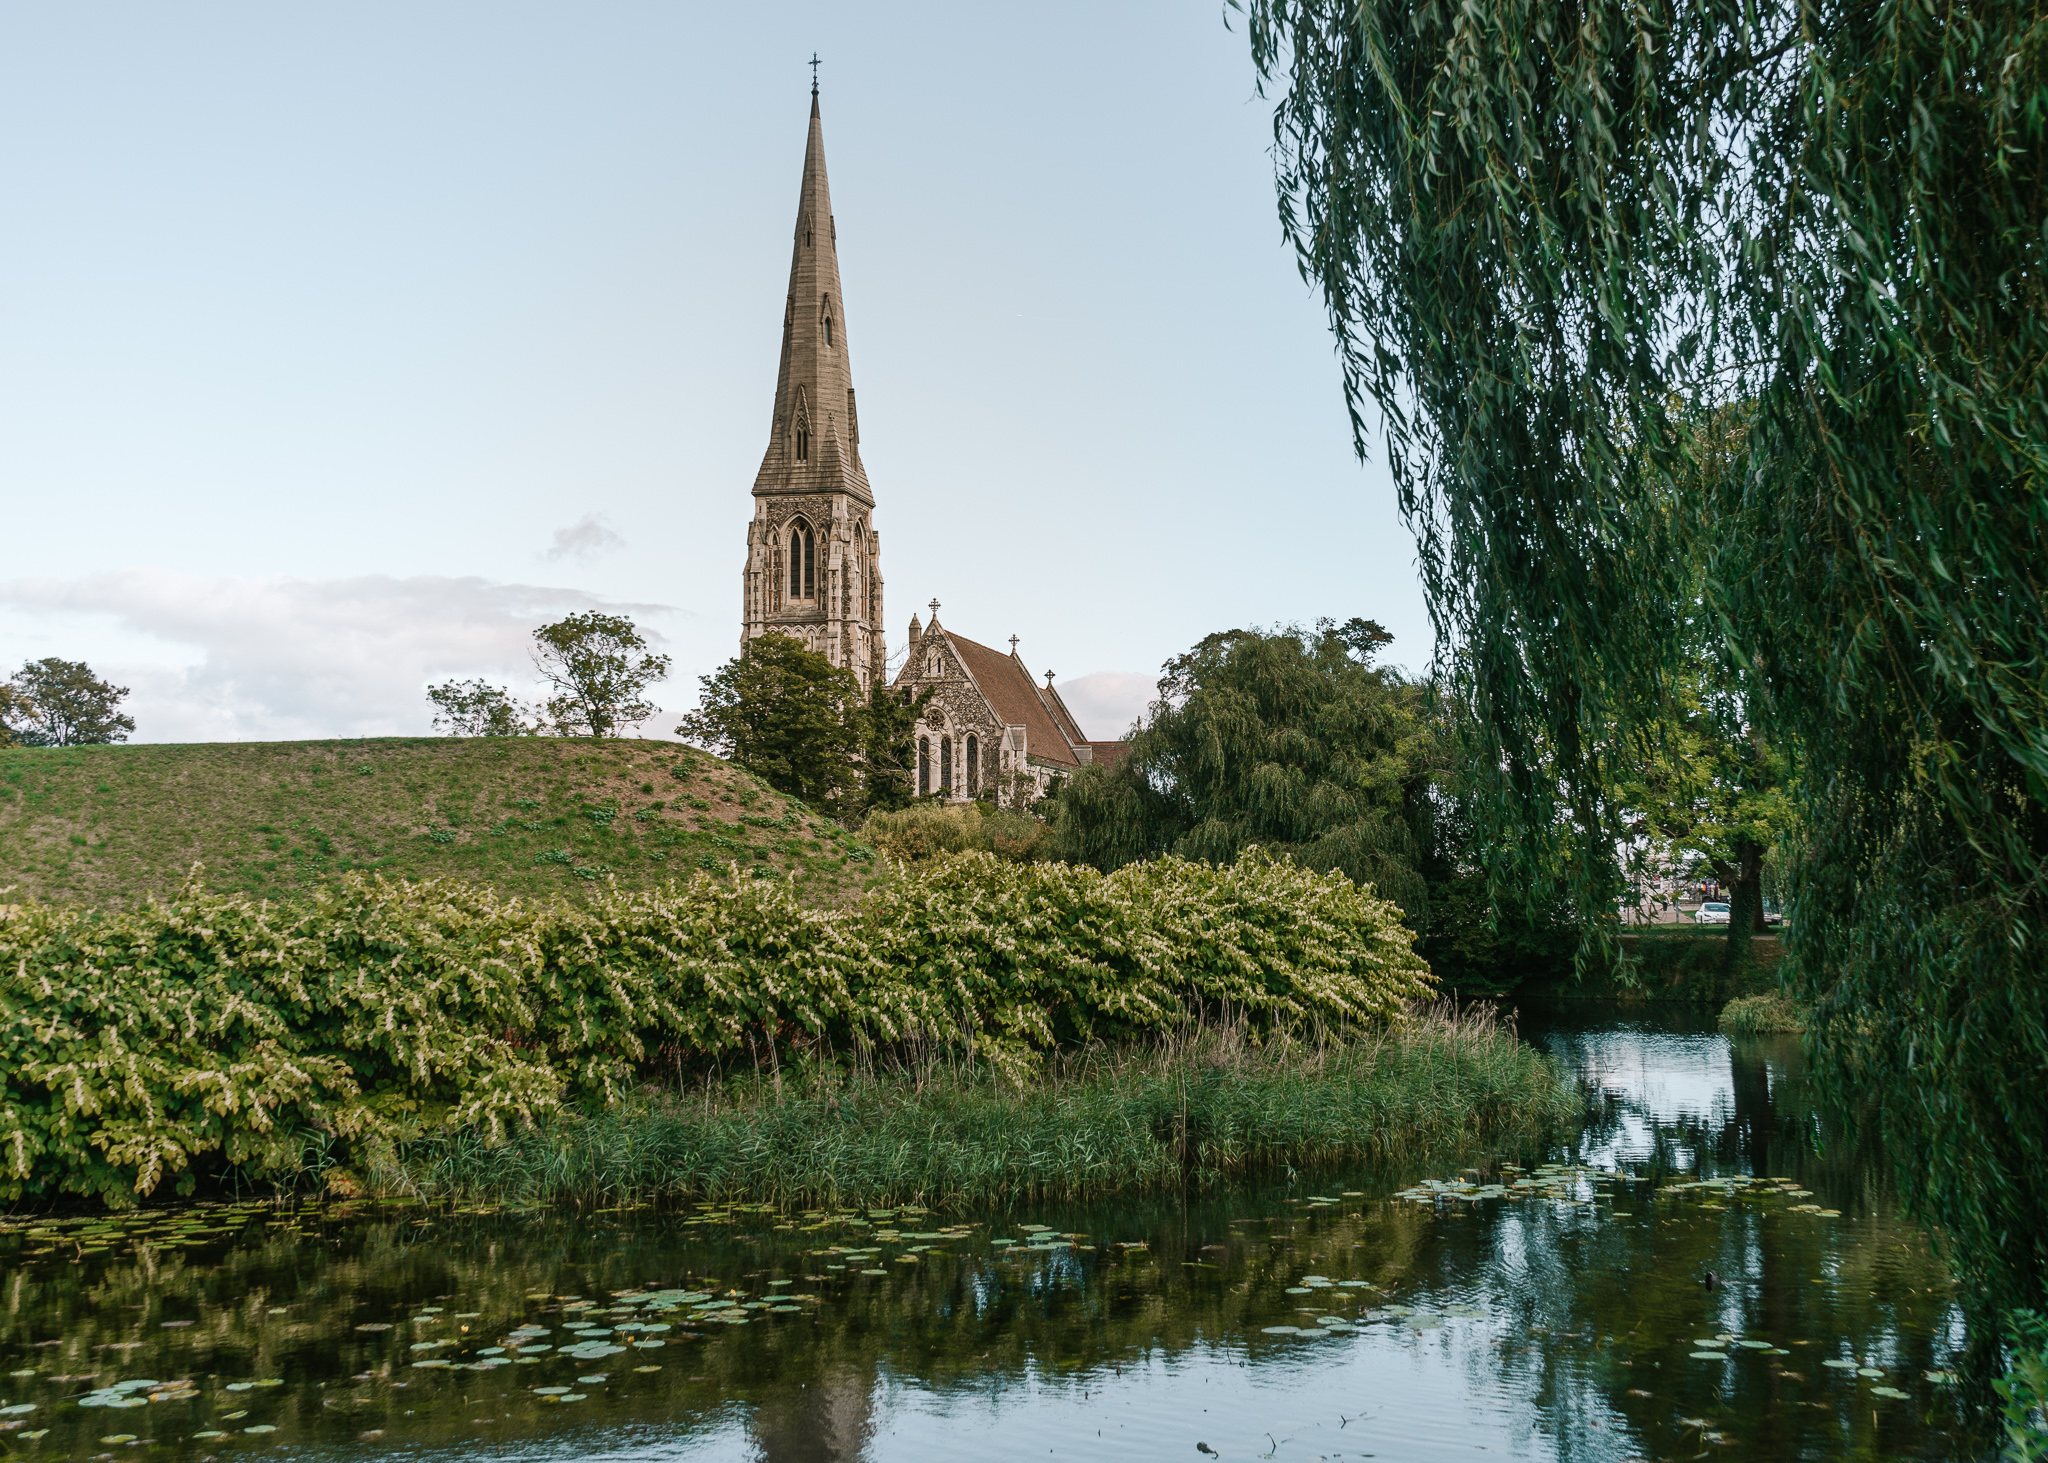 St. Albans Church with a tall spire coming from an old stone church in a grassy area on a hill, overlooking a green pond with lily pads in Kastellet, Copenhagen